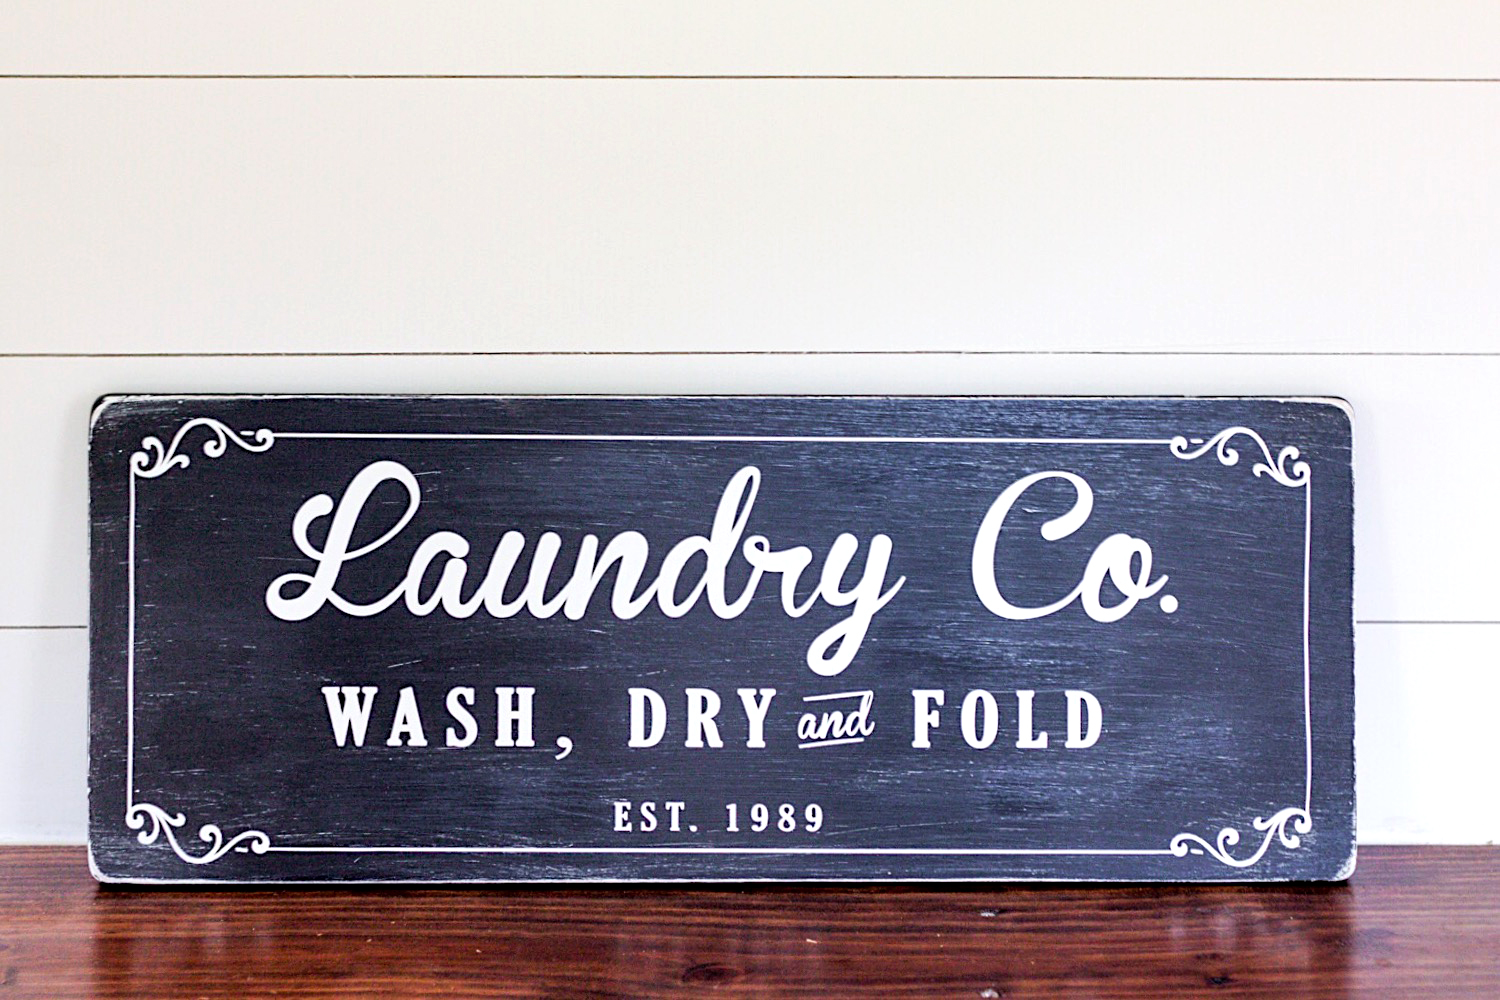 Farmhouse Laundry Room Sign Tutorial and FREE SVG cut file | ORC Week 4